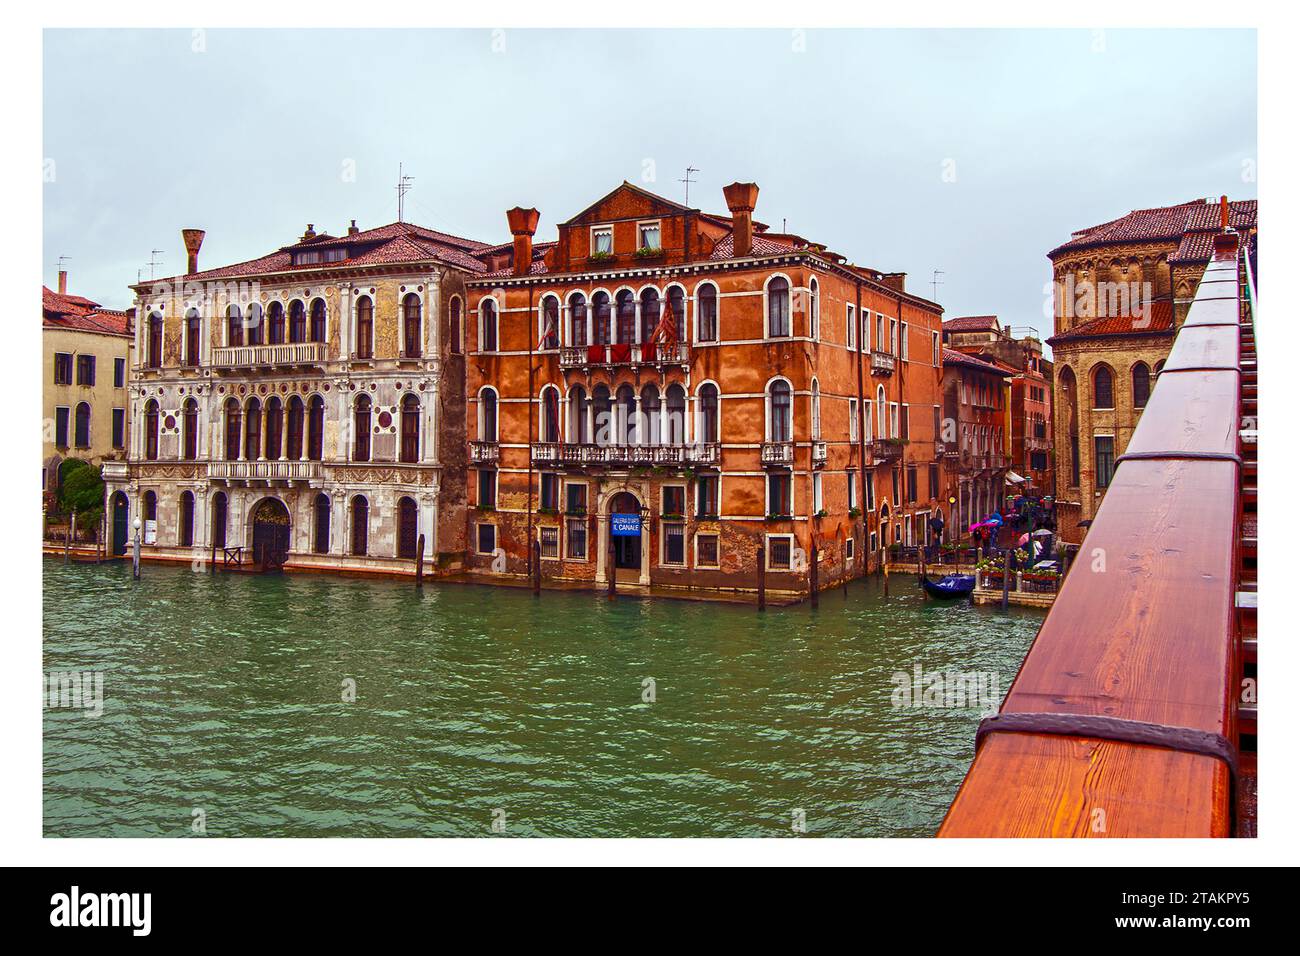 The Grand Canal, Venice Stock Photo